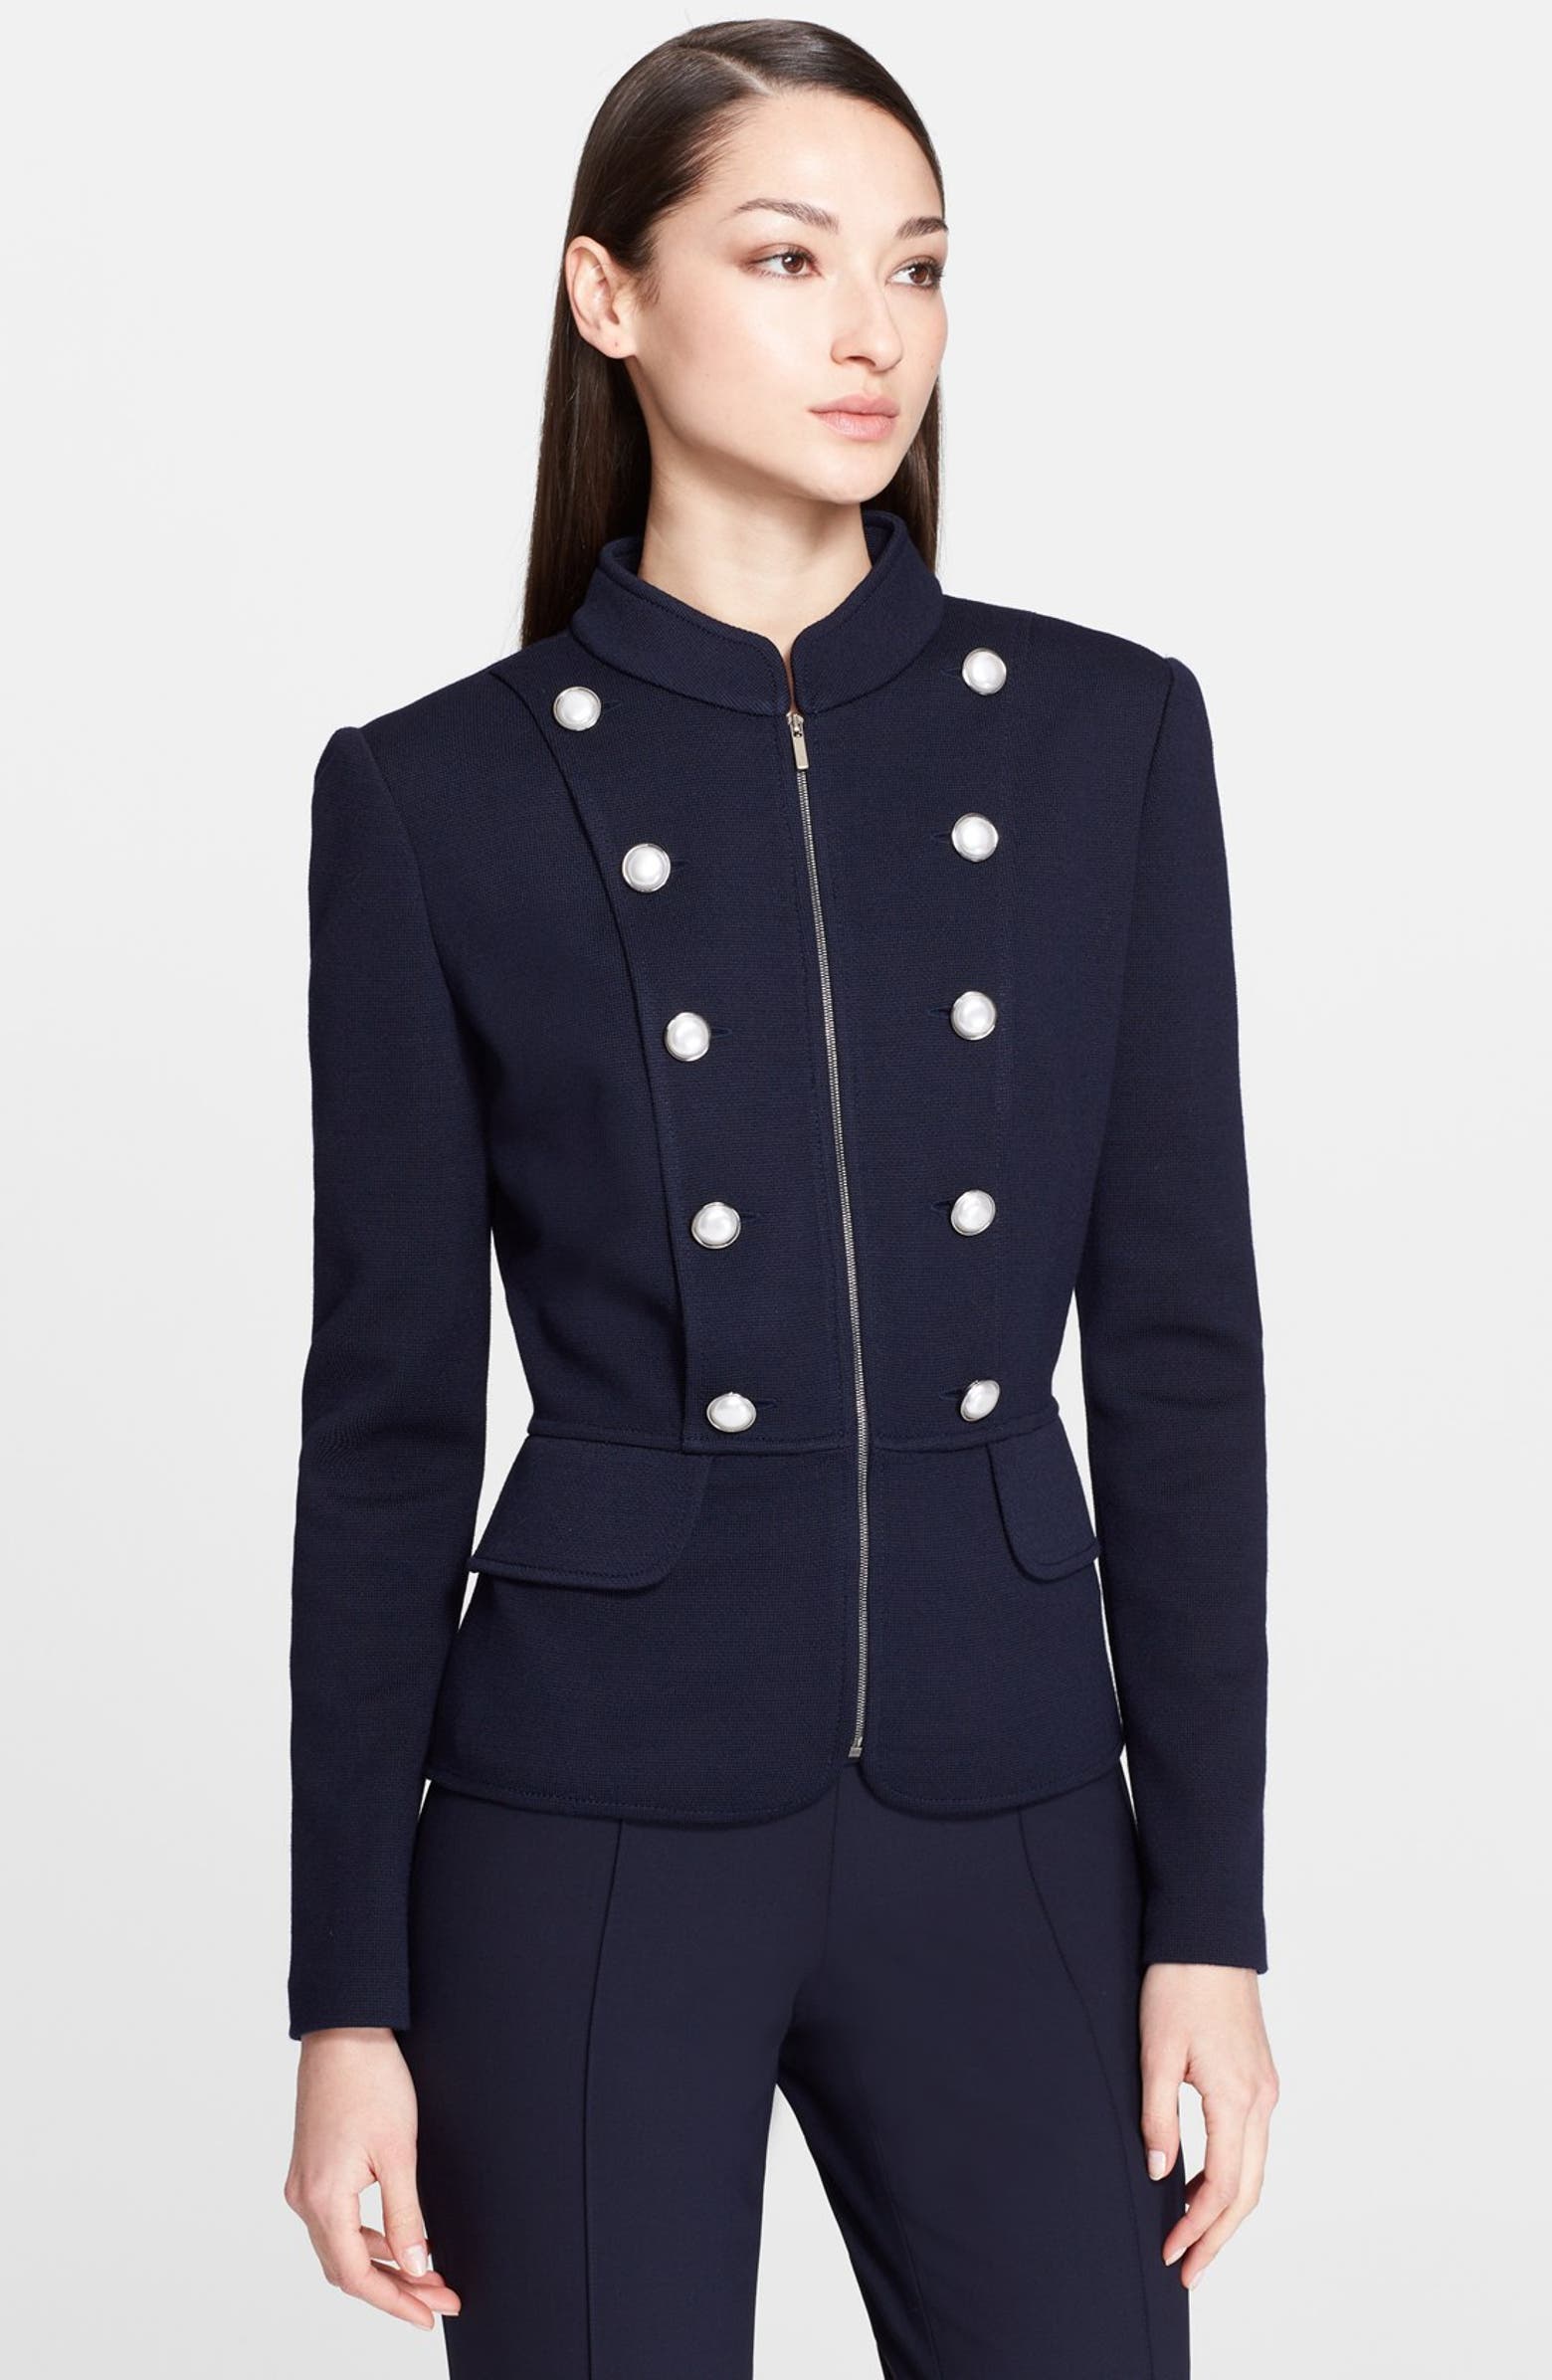 St. John Collection Milano Knit Military Jacket | Nordstrom